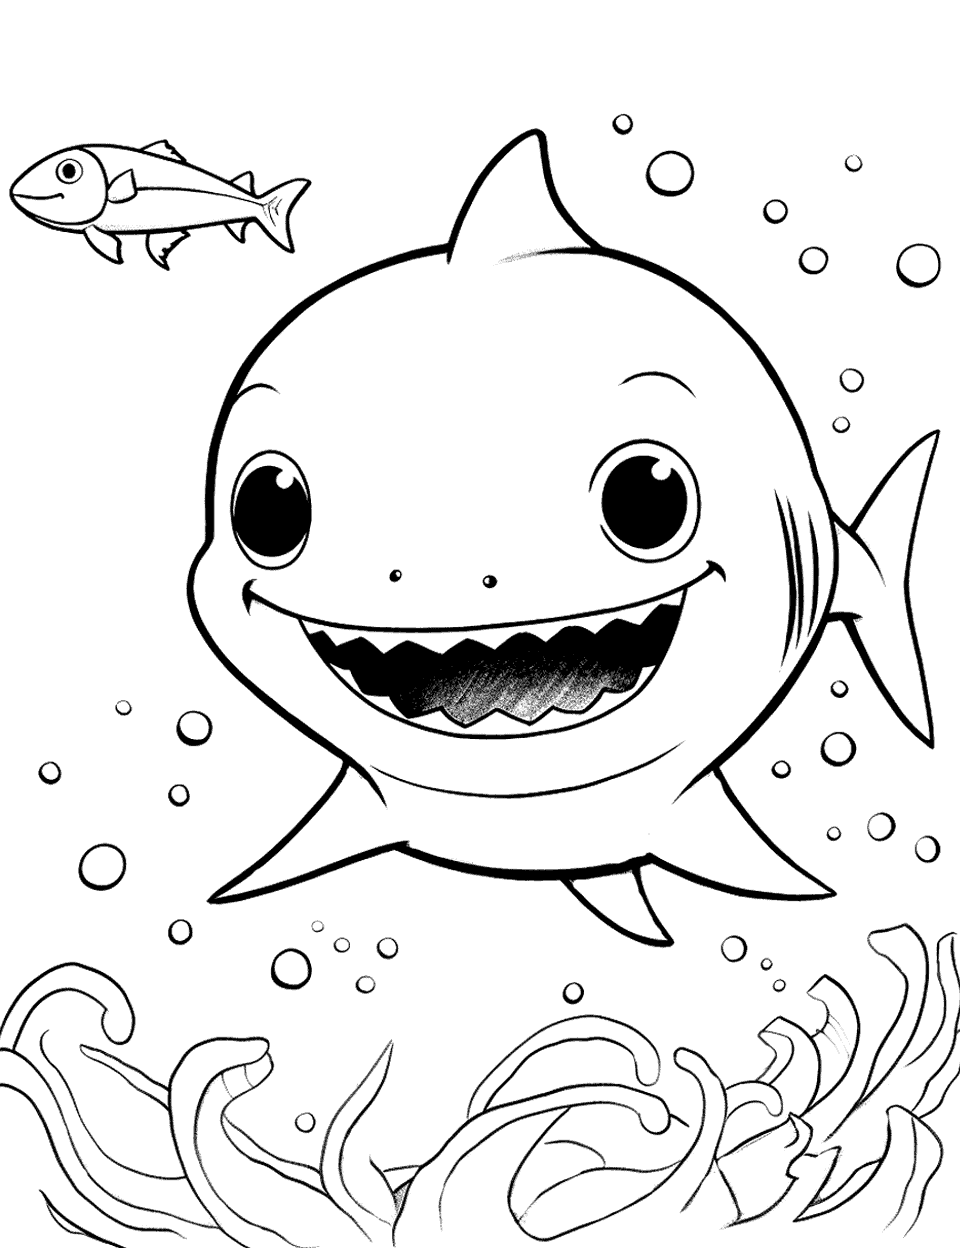 Baby Shark Making Friends Coloring Page - Baby Shark swimming around and making friends with small fishes in the ocean.